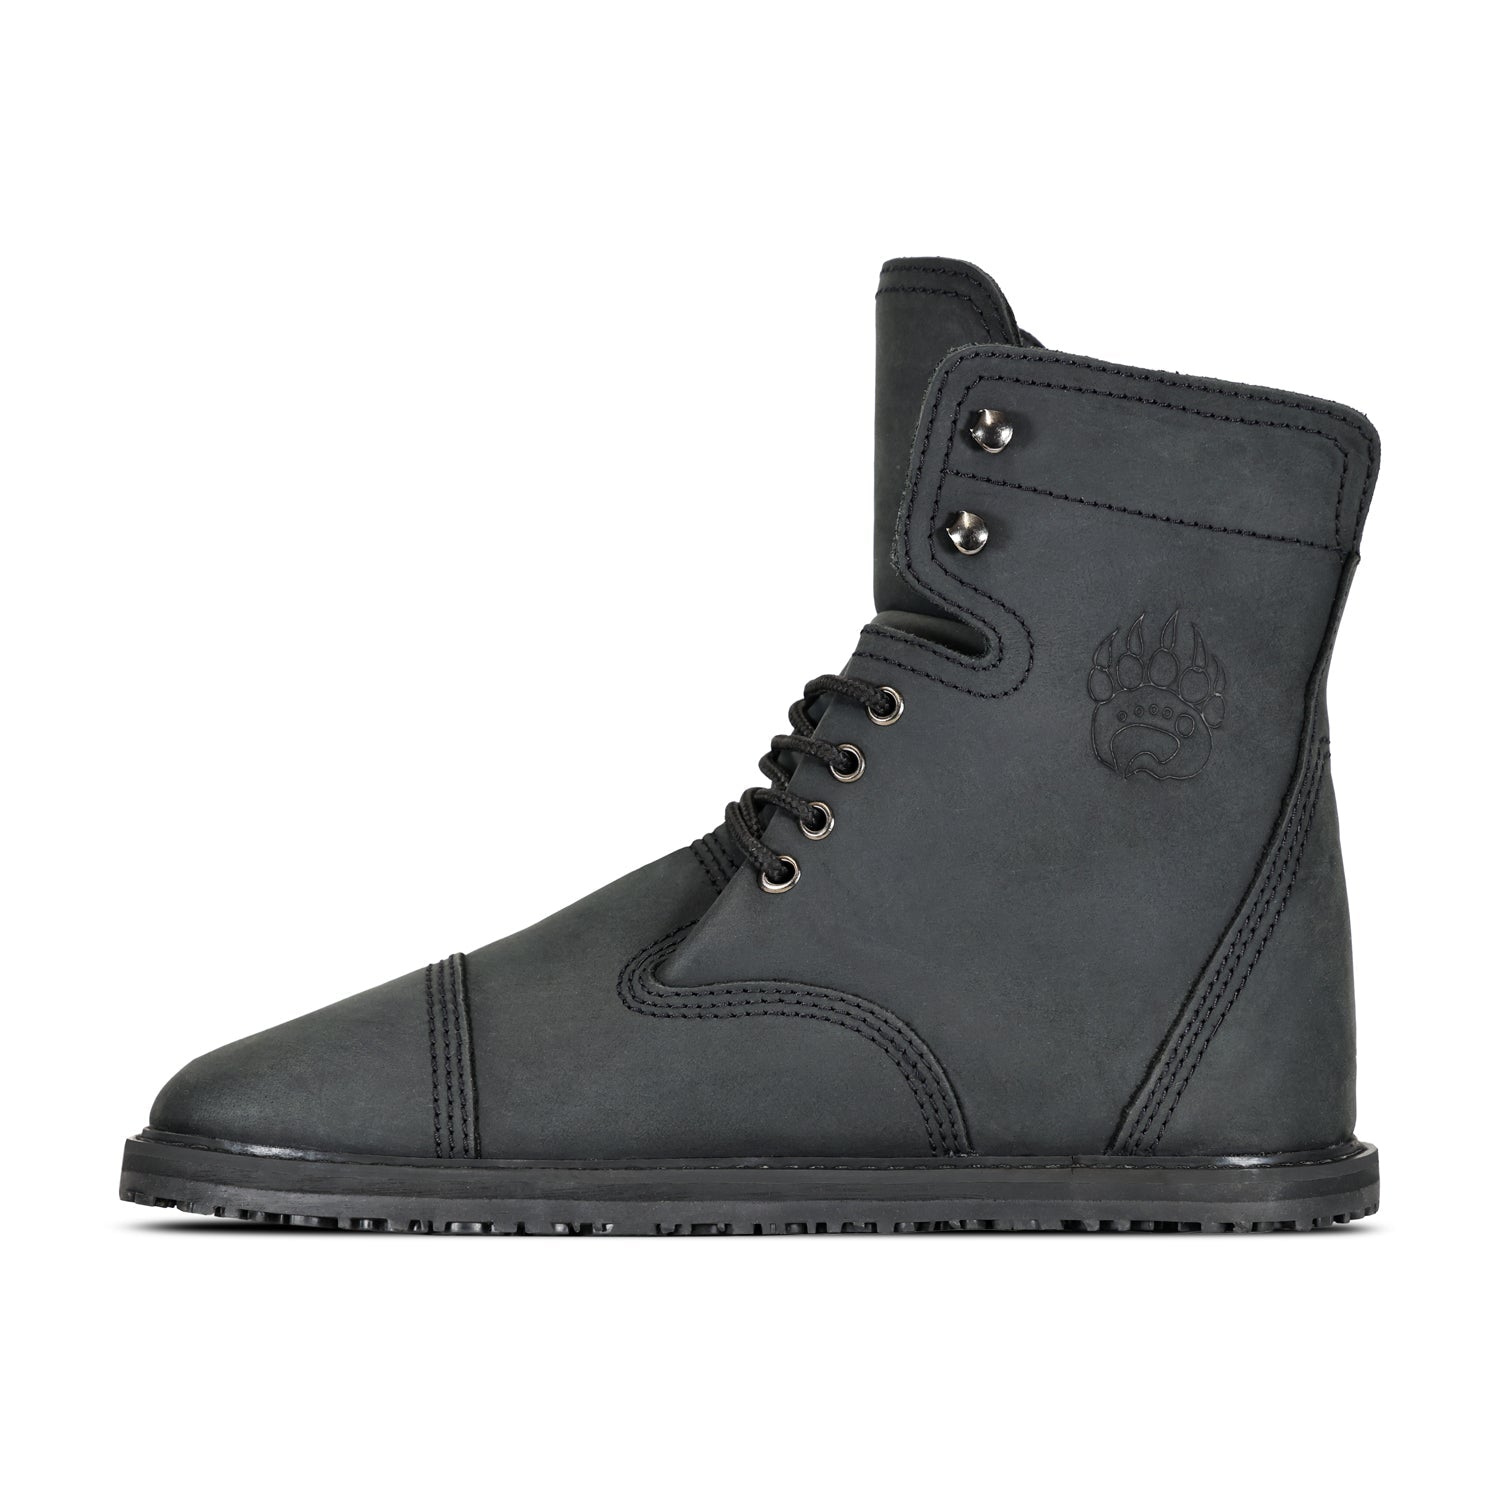 Side view of a black high-top Bruin barefoot boot featuring lace-up closure, embossed Bearfoot logo on the side, and a flat black sole.